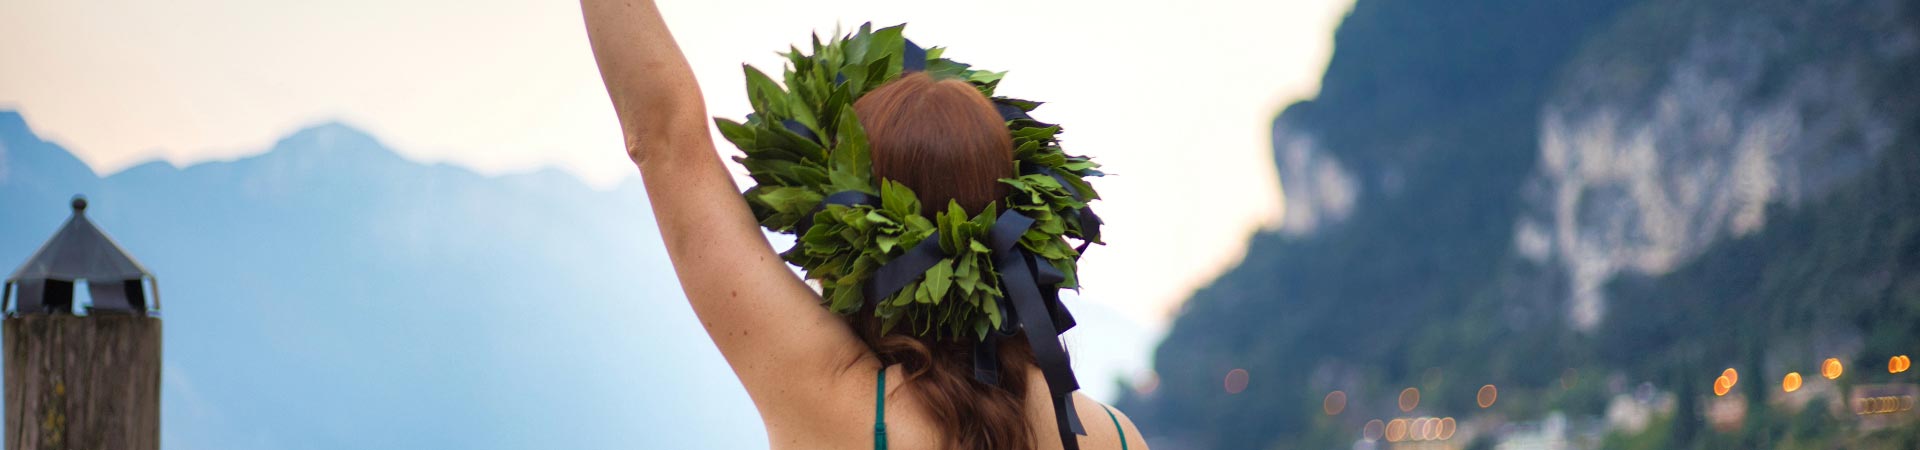 A woman raising her arm with a Bay Laurel wreath on her head